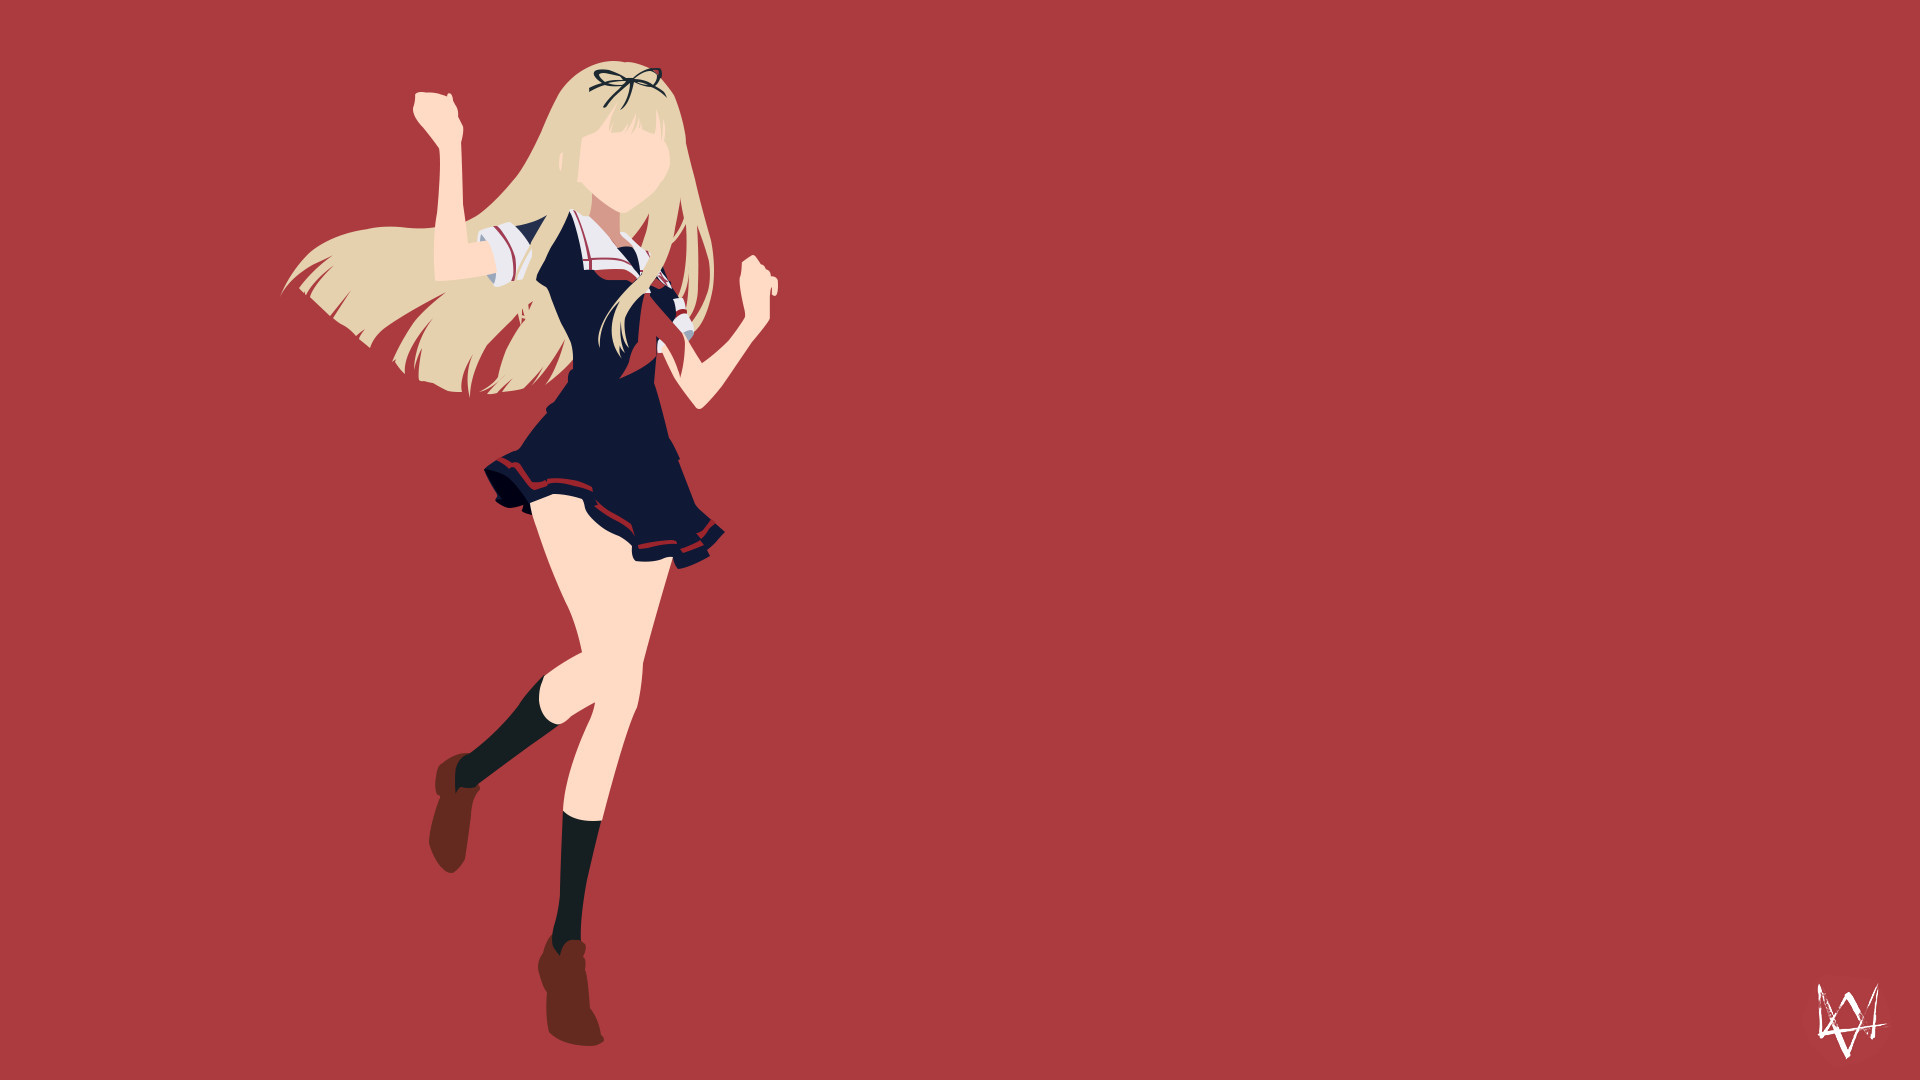 1920x1080 ... Yuudachi (Kantai Collection) Minimalist Anime WP by Lucifer012